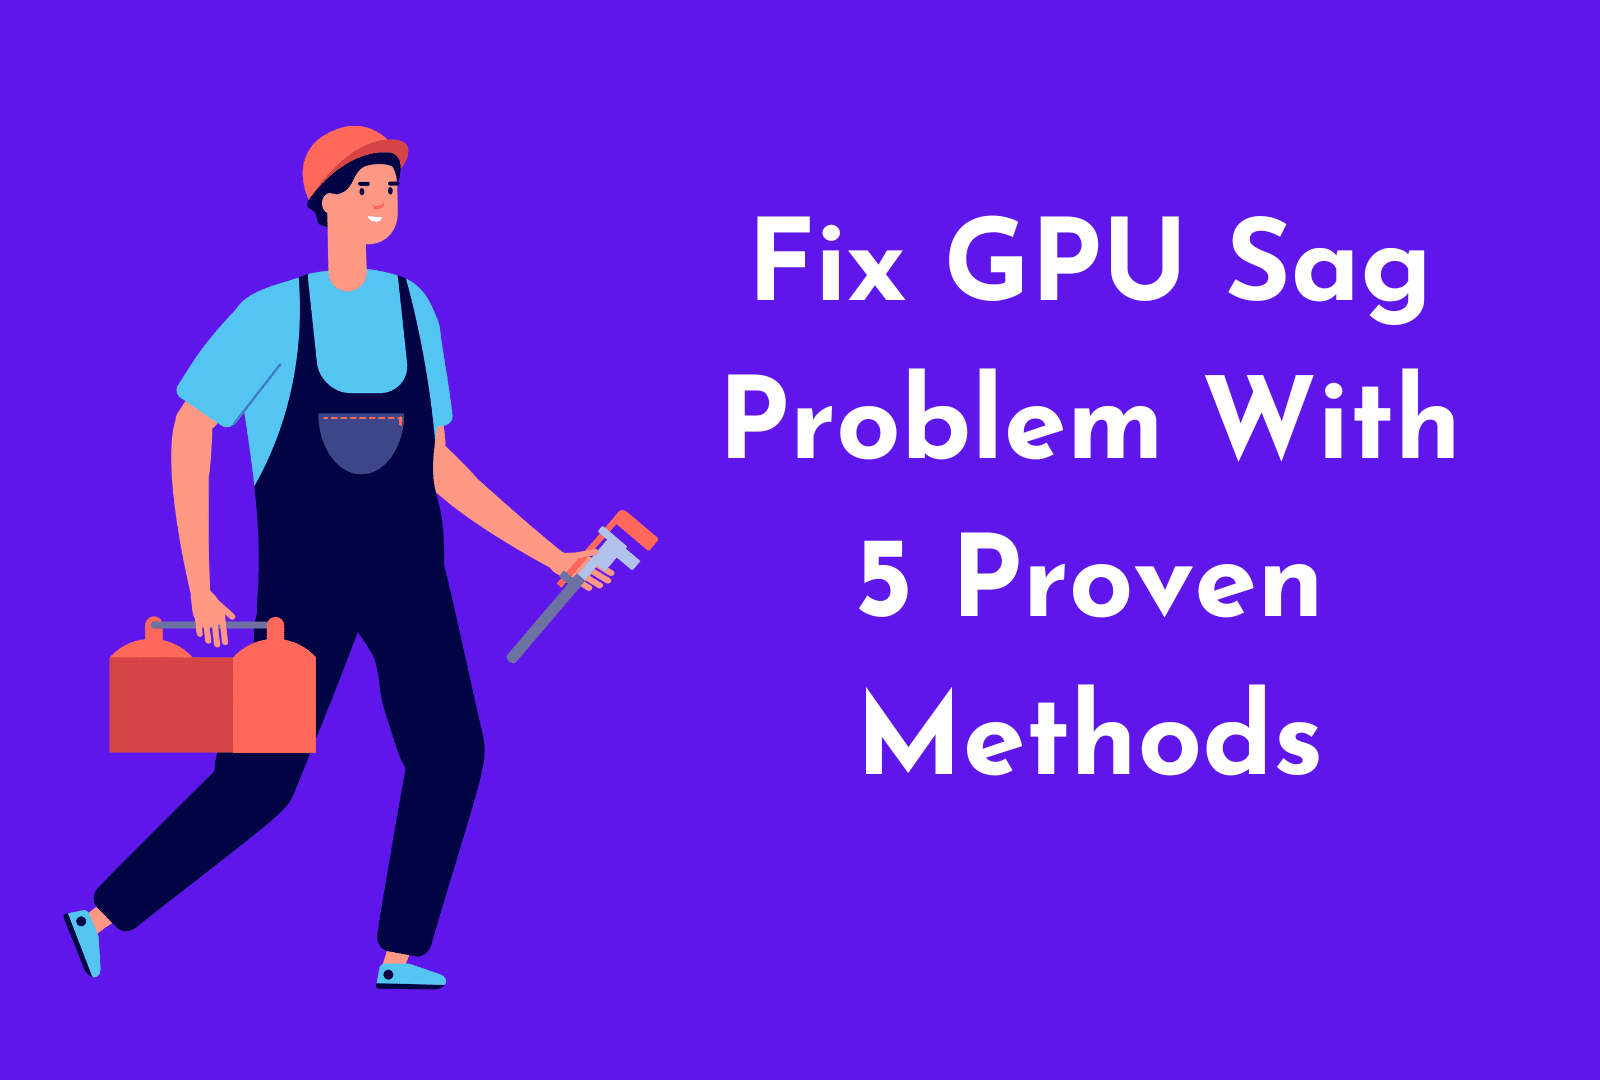 C:\Users\Mohsin\Downloads\How to Fix GPU Sag (3).png